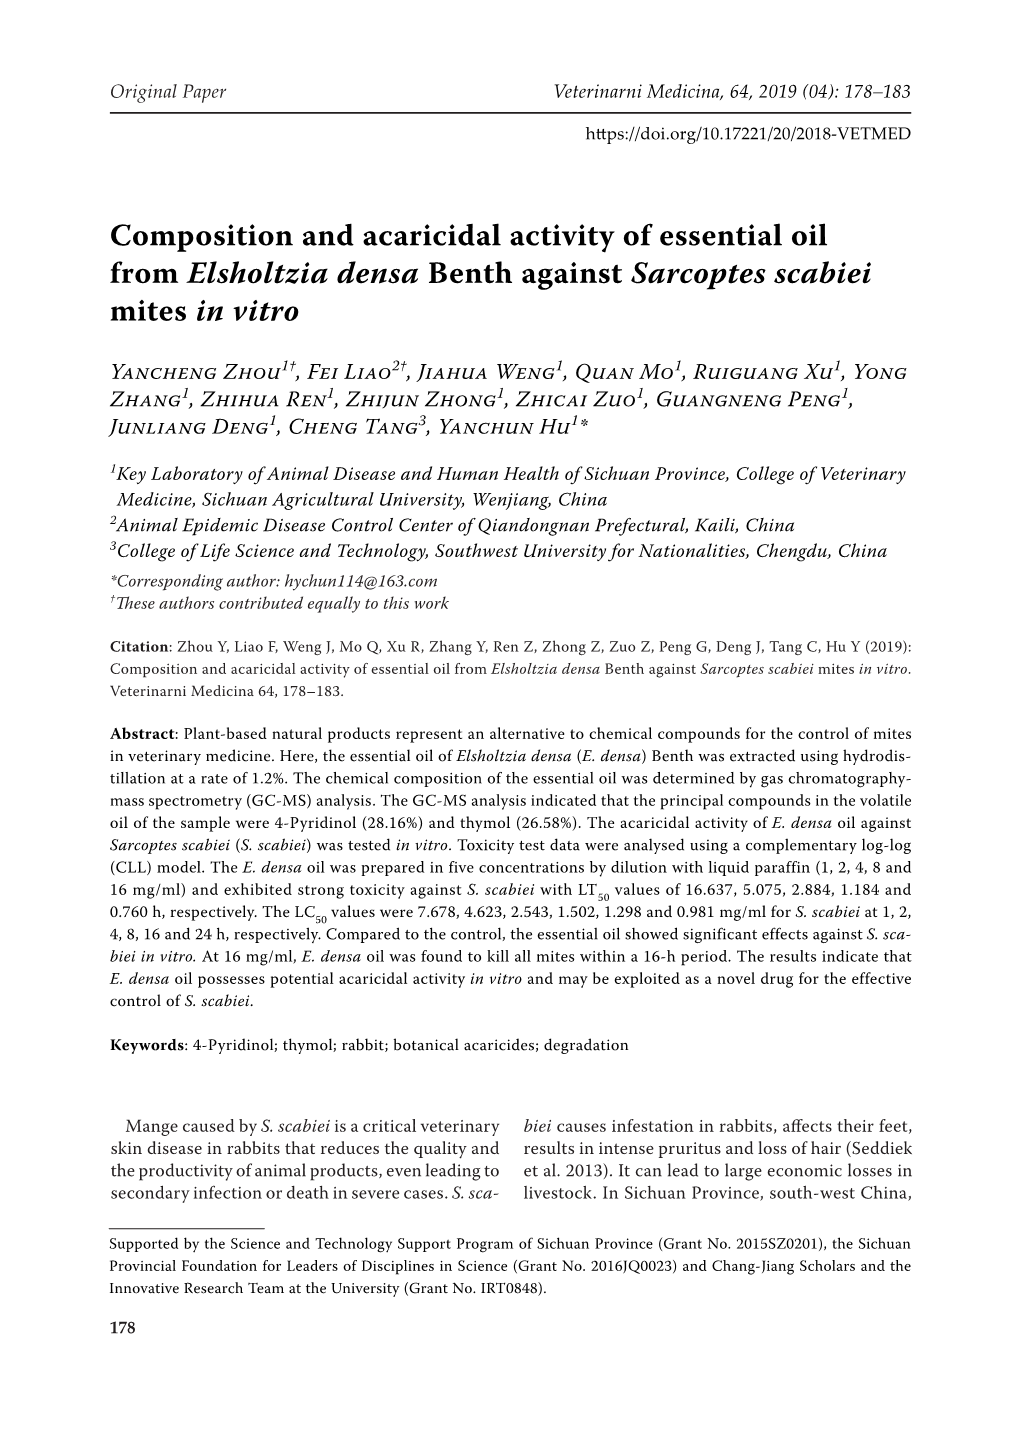 Composition and Acaricidal Activity of Essential Oil from Elsholtzia Densa Benth Against Sarcoptes Scabiei Mites in Vitro